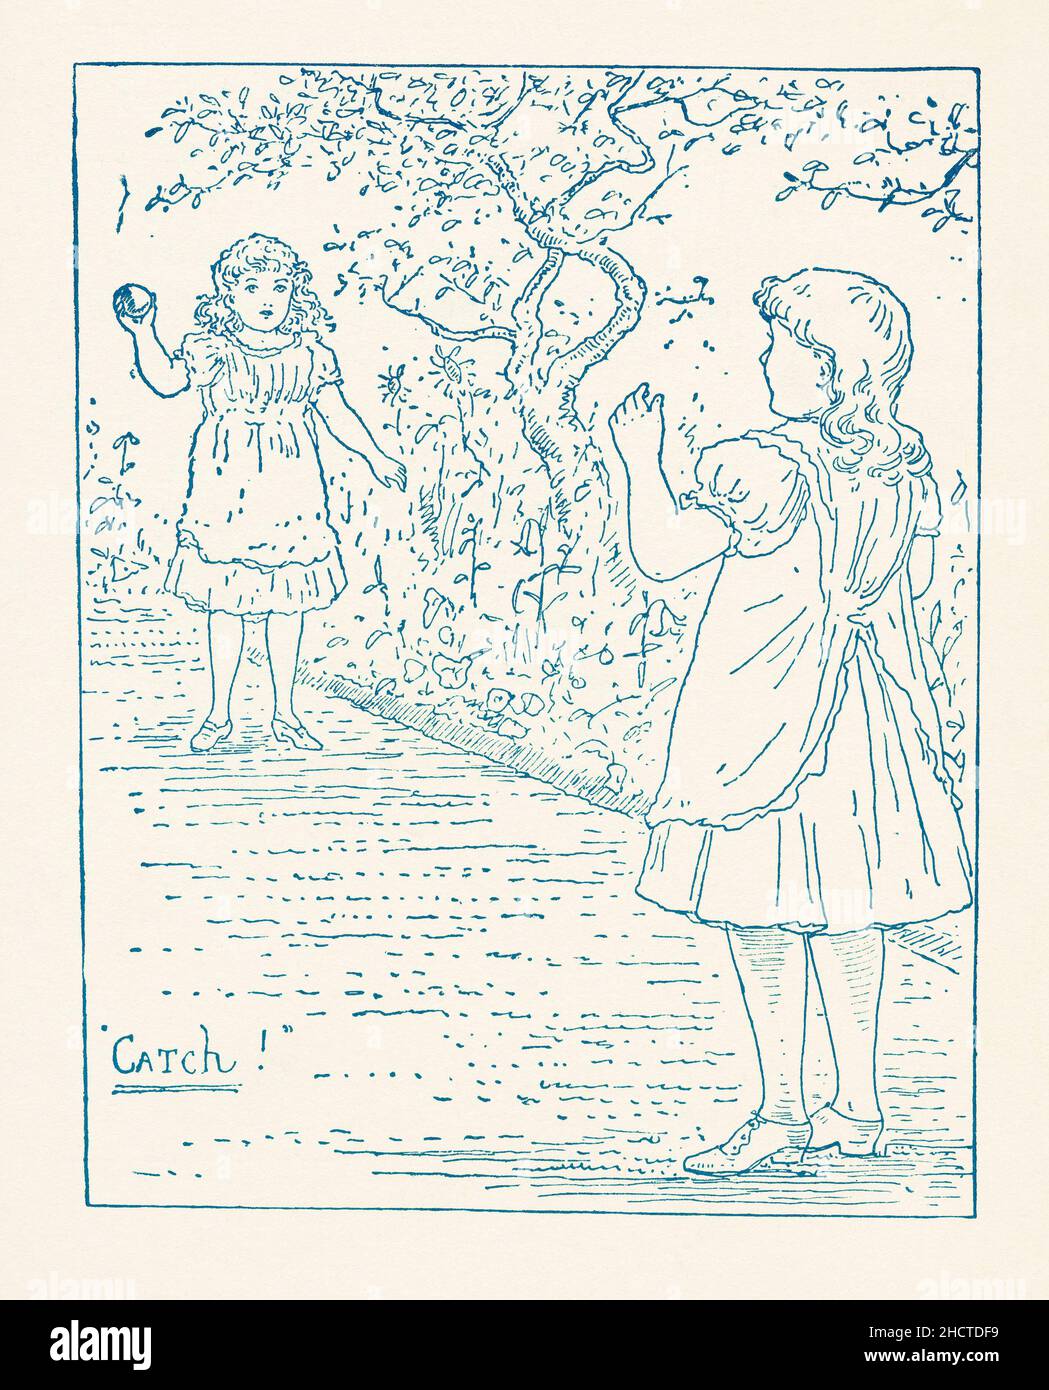 A Victorian book illustration c. 1800 showing two girls playing ‘catch’ with a ball on their garden path – nineteenth century graphics. Stock Photo